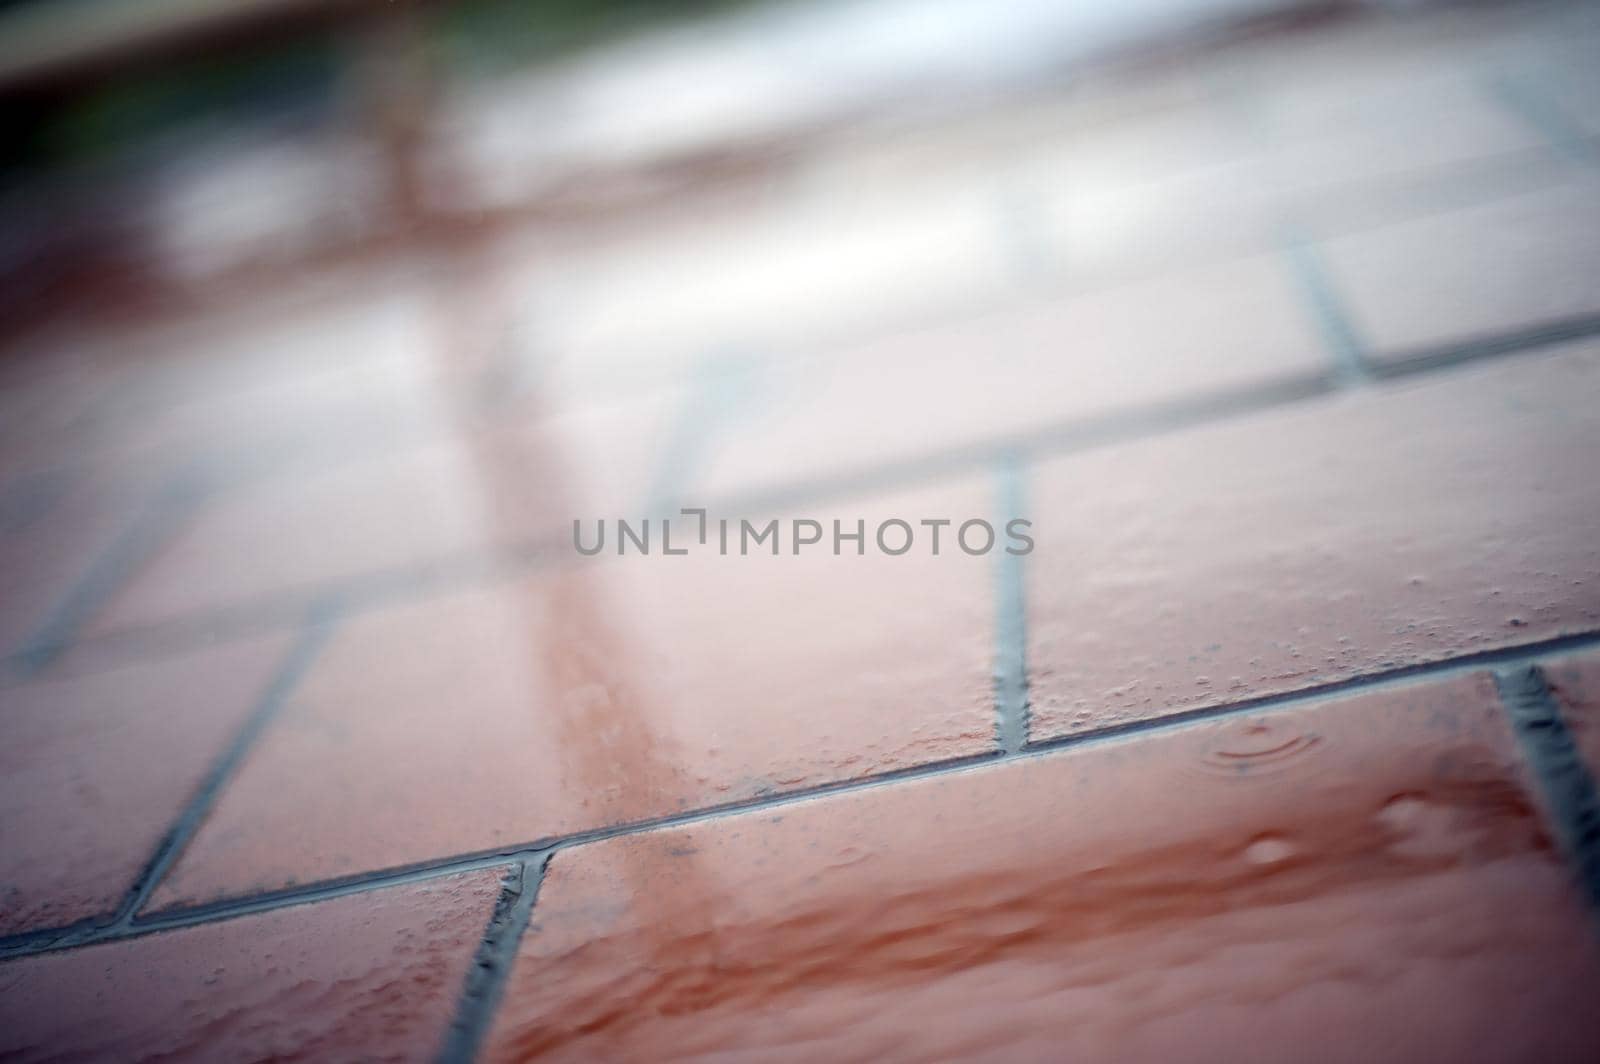 Reflections in Wet Brick Tiles in Rainy Weather by sanisra